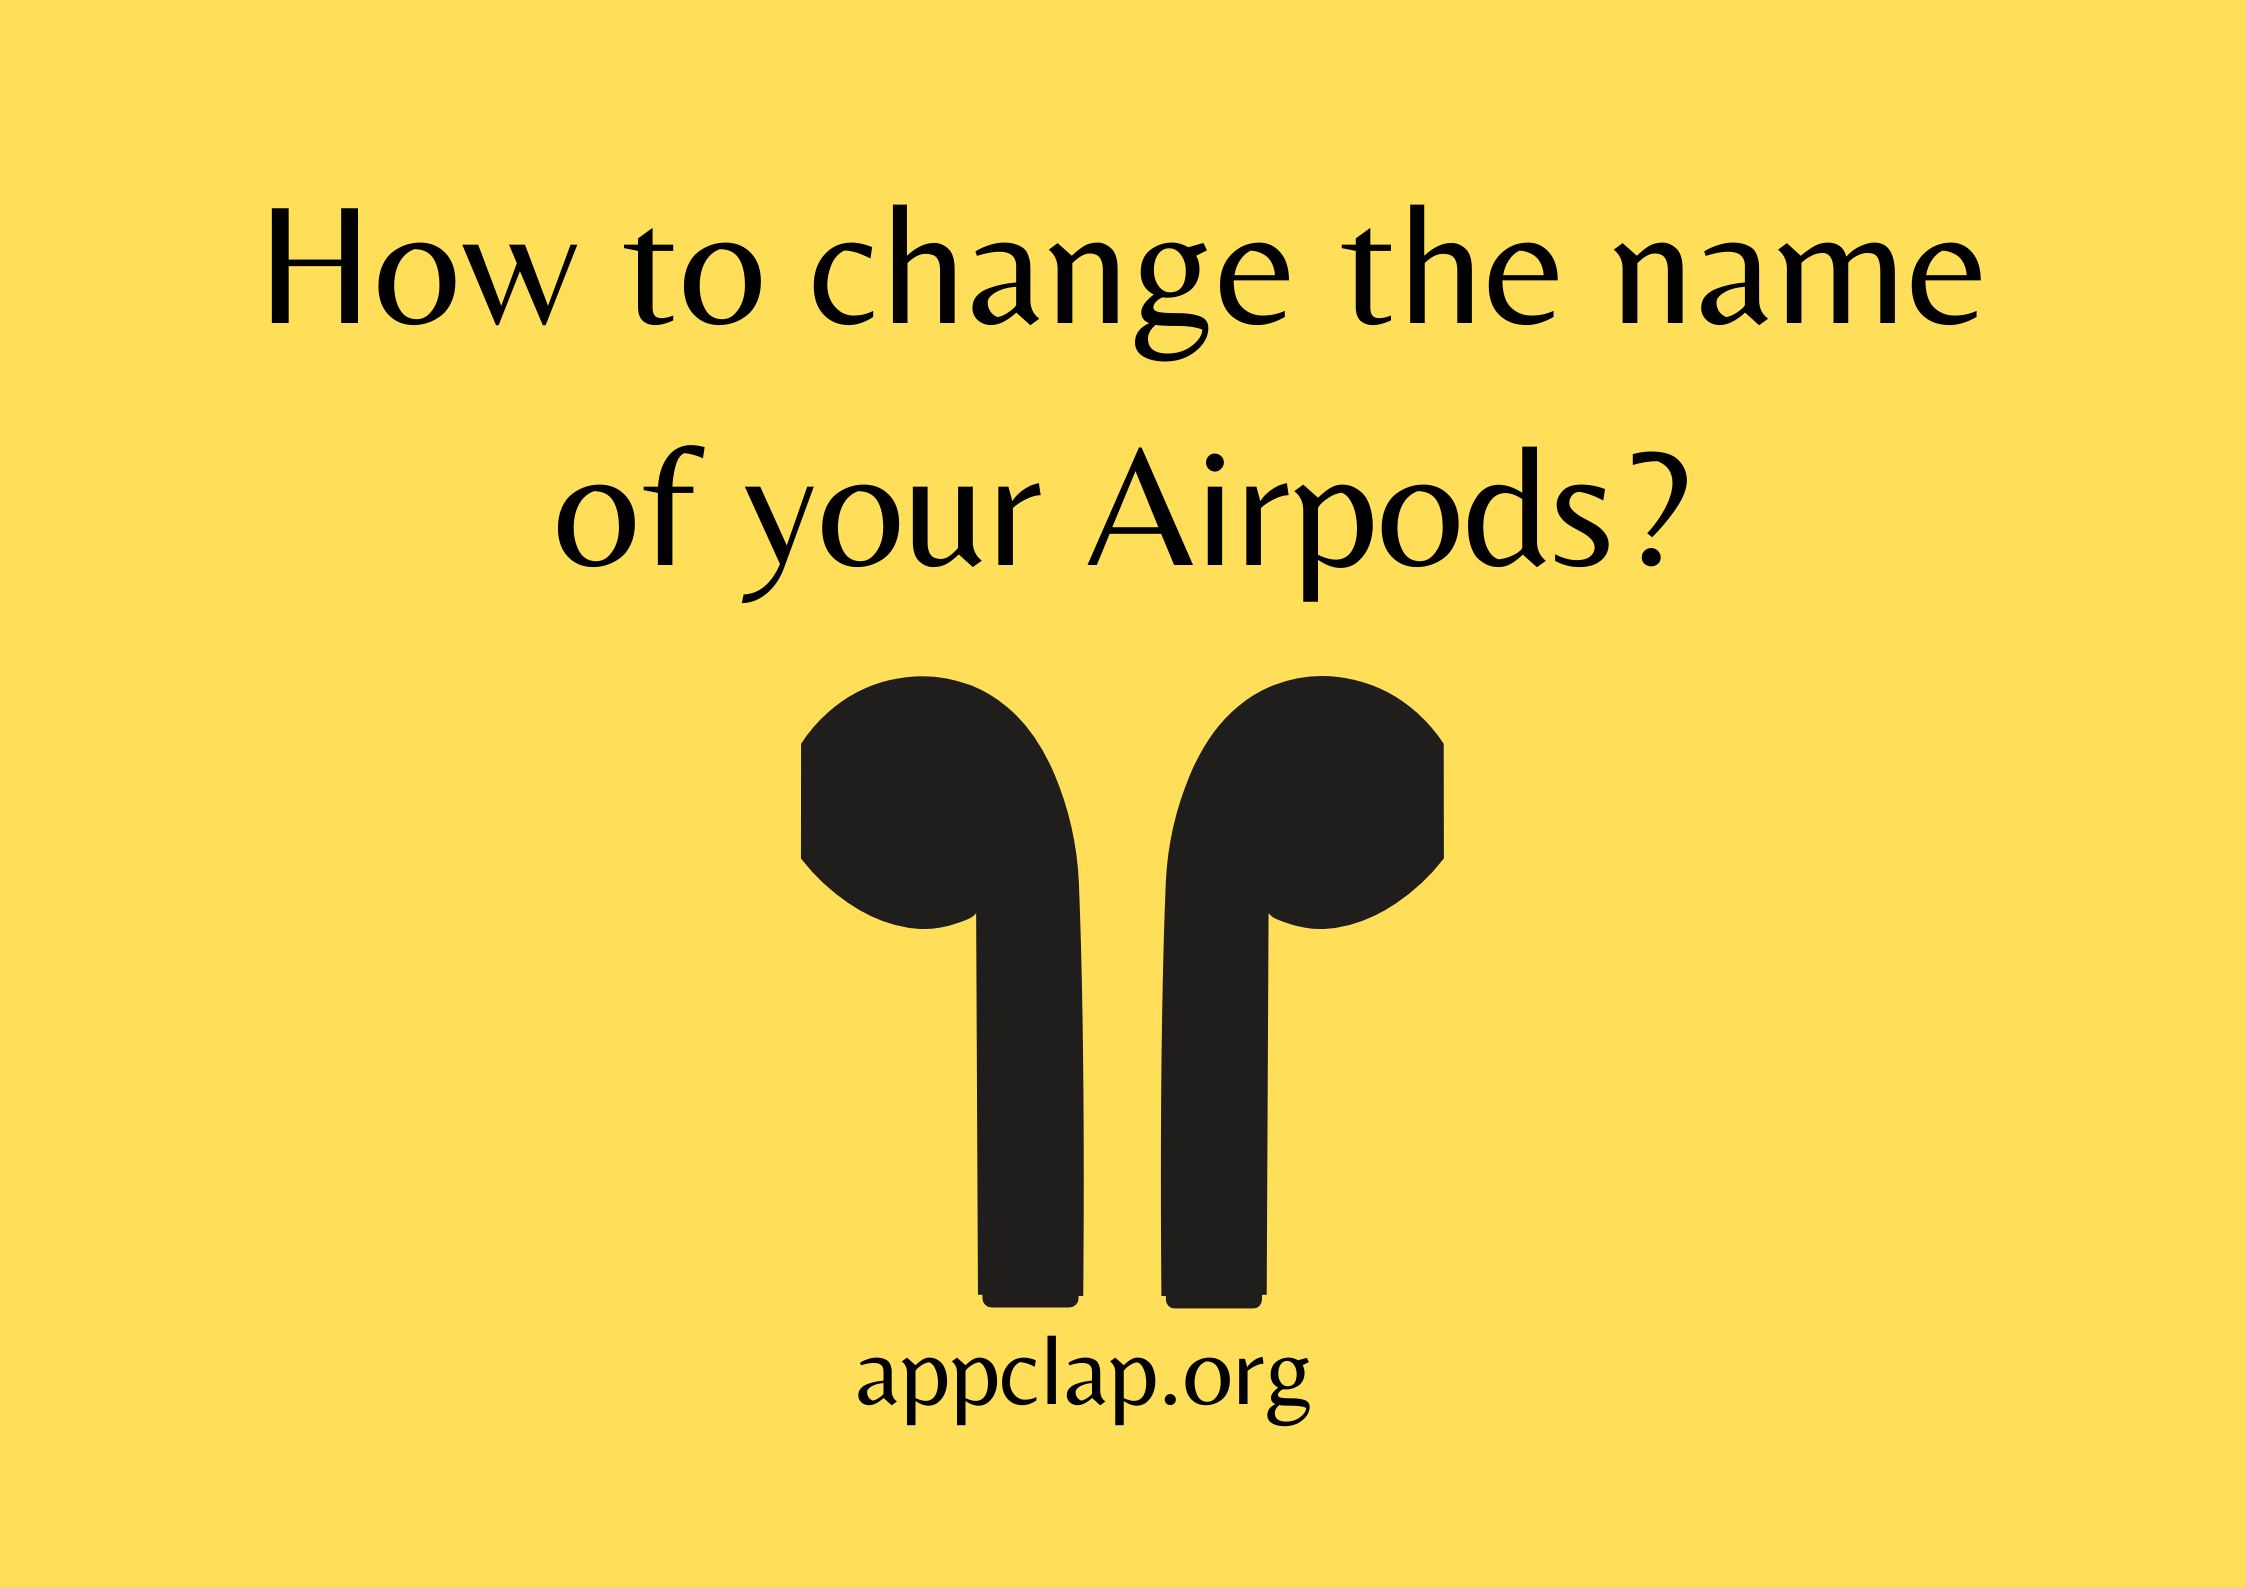 How to change the name of your Airpods?